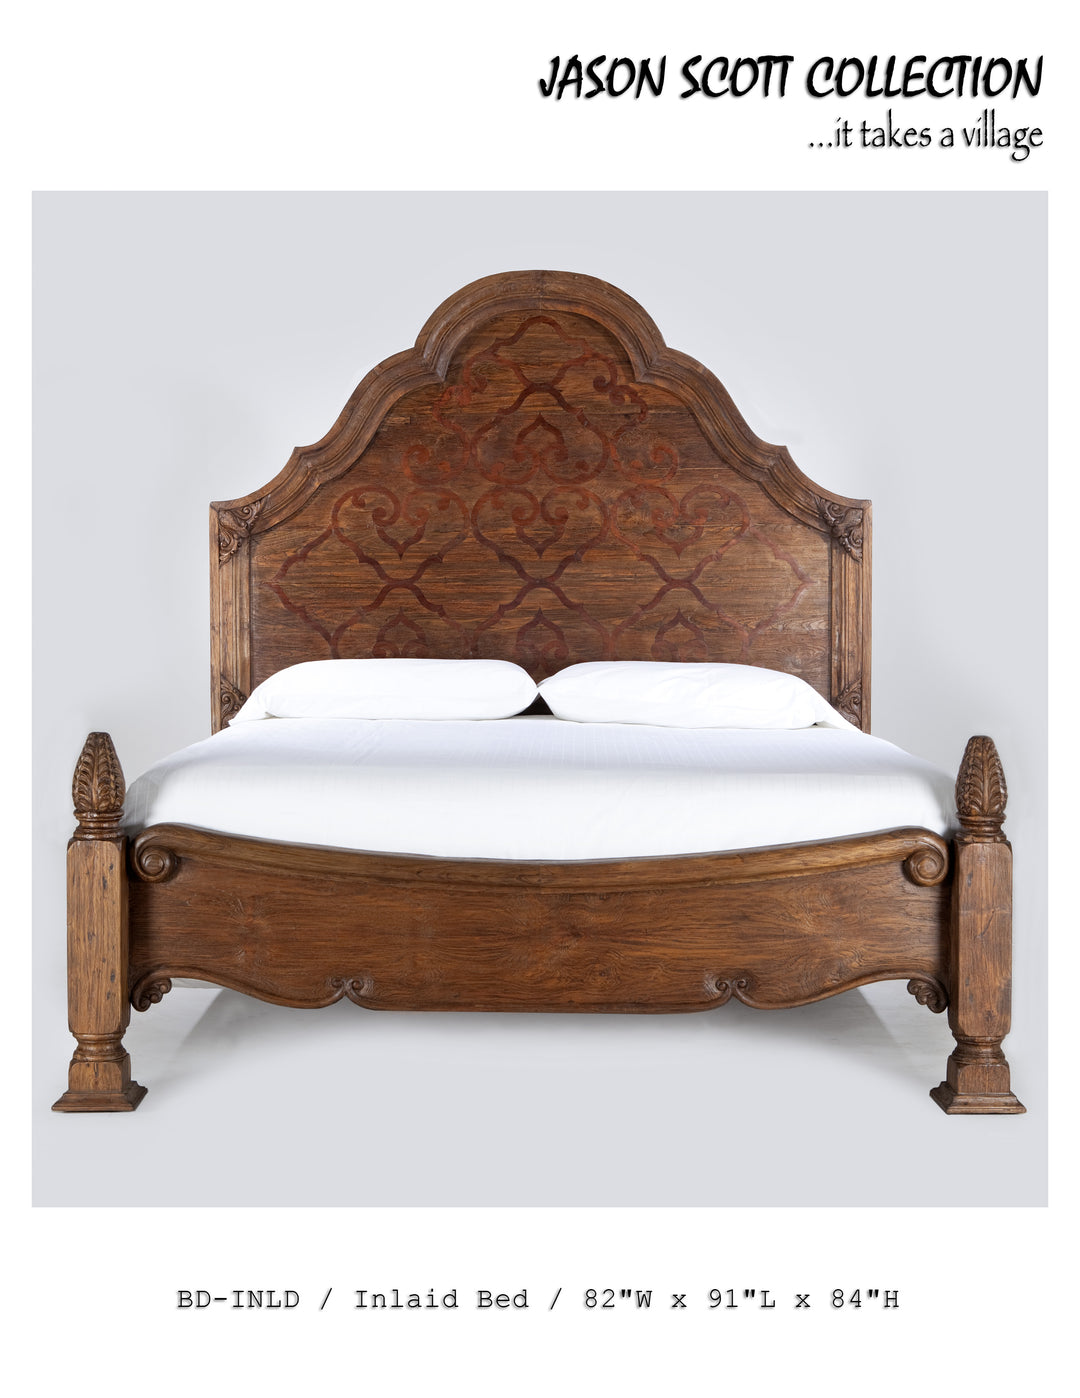 Inlaid Bed